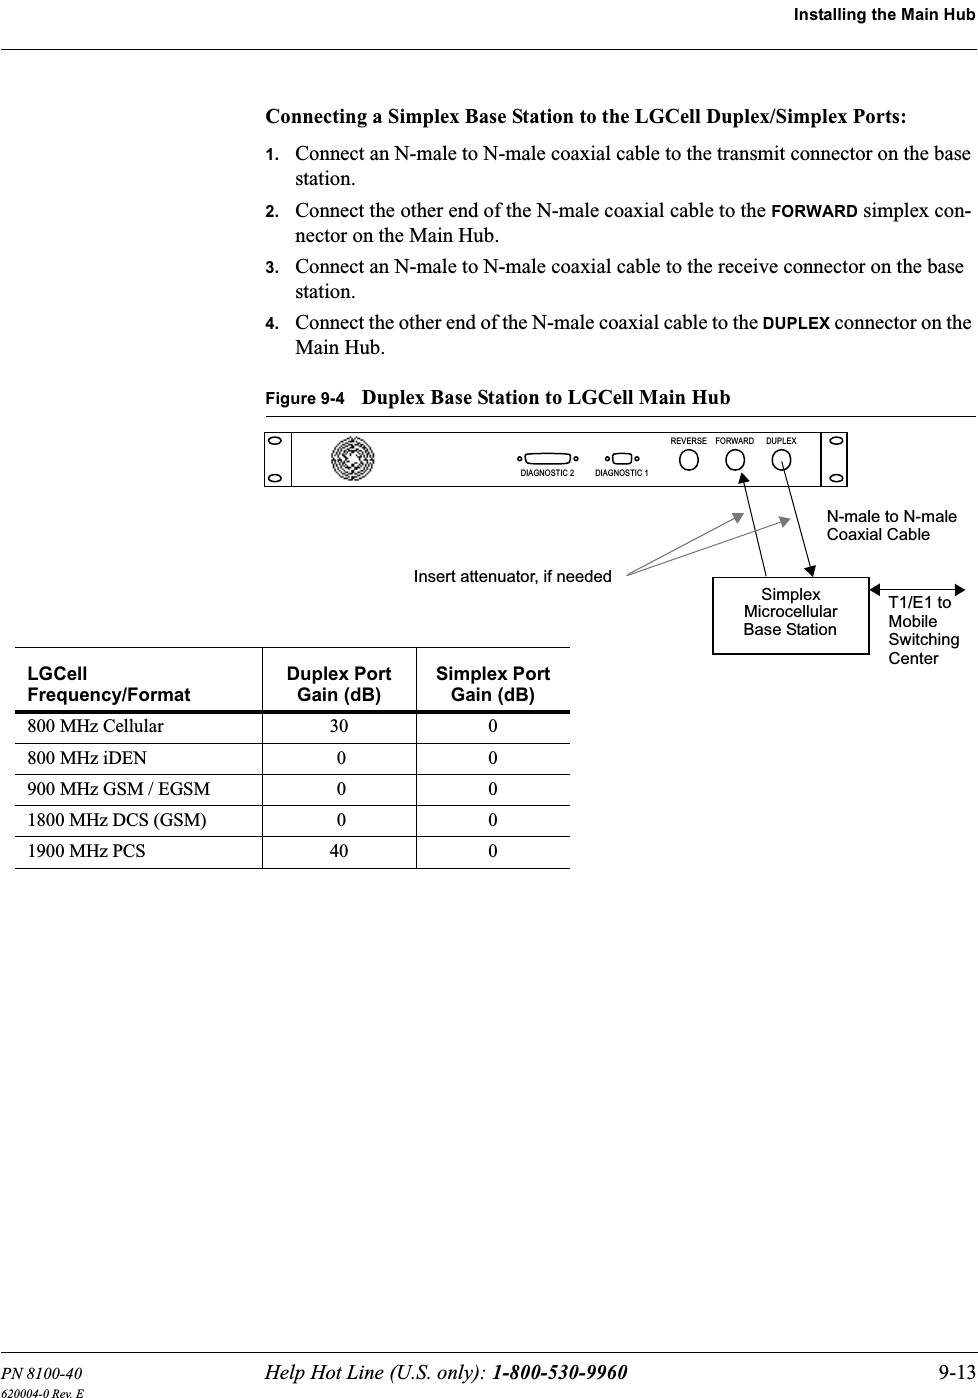 PN 8100-40 Help Hot Line (U.S. only): 1-800-530-9960 9-13620004-0 Rev. EInstalling the Main HubConnecting a Simplex Base Station to the LGCell Duplex/Simplex Ports:1. Connect an N-male to N-male coaxial cable to the transmit connector on the base station.2. Connect the other end of the N-male coaxial cable to the FORWARD simplex con-nector on the Main Hub.3. Connect an N-male to N-male coaxial cable to the receive connector on the base station.4. Connect the other end of the N-male coaxial cable to the DUPLEX connector on the Main Hub.Figure 9-4 Duplex Base Station to LGCell Main HubREVERSE FORWARD DUPLEXDIAGNOSTIC 2 DIAGNOSTIC 1MicrocellularN-male to N-maleCoaxial CableBase StationSimplex T1/E1 toMobileSwitchingCenterInsert attenuator, if neededLGCell Frequency/FormatDuplex PortGain (dB)Simplex PortGain (dB)800 MHz Cellular 30 0800 MHz iDEN 0 0900 MHz GSM / EGSM 0 01800 MHz DCS (GSM) 0 01900 MHz PCS 40 0